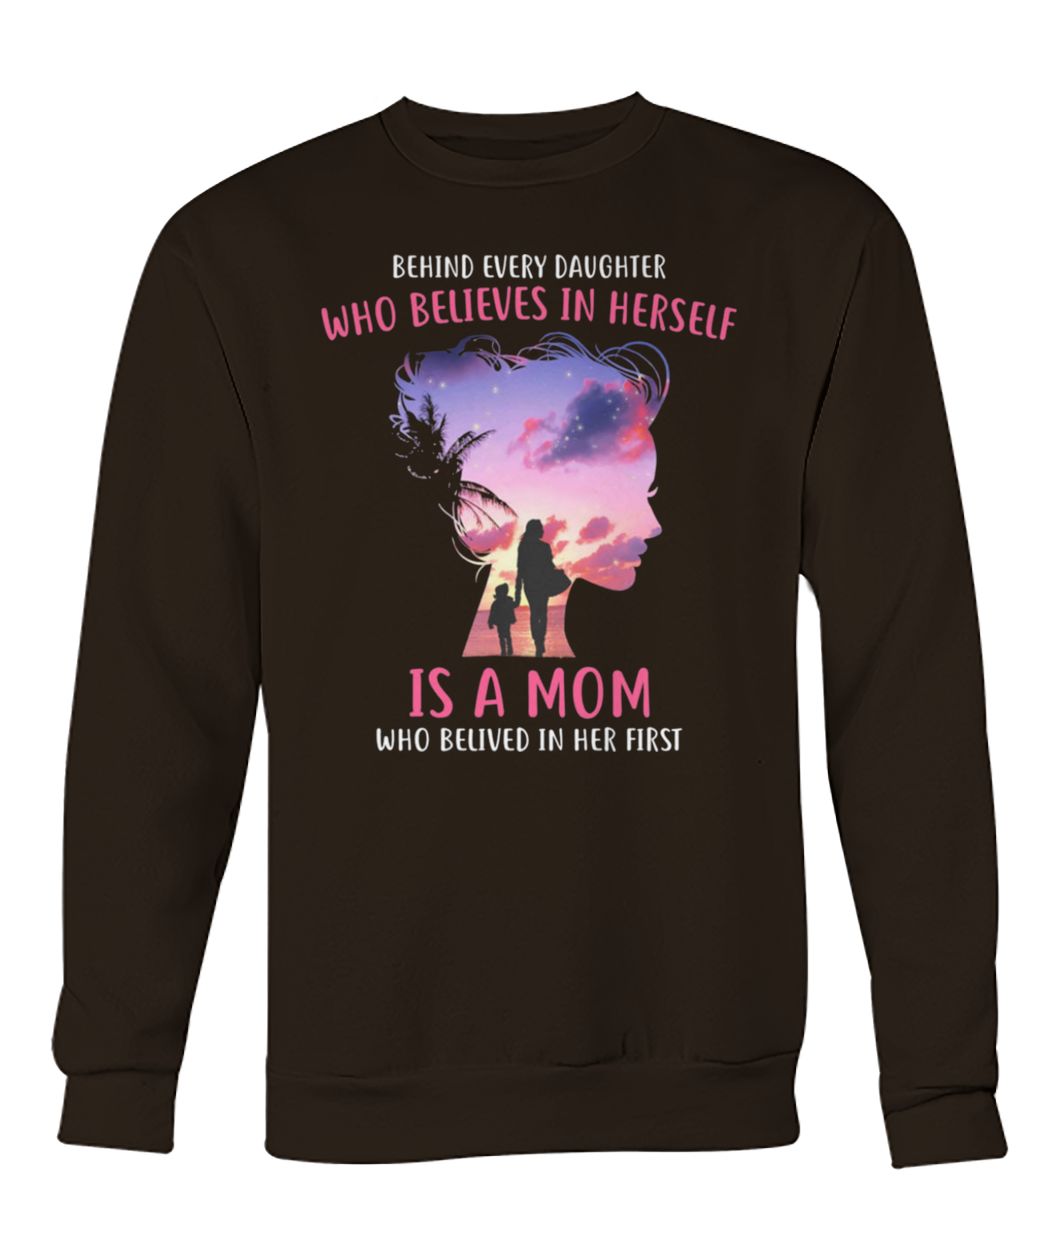 Behind every daughter who believes in herself is a mom who believed in her first crew neck sweatshirt